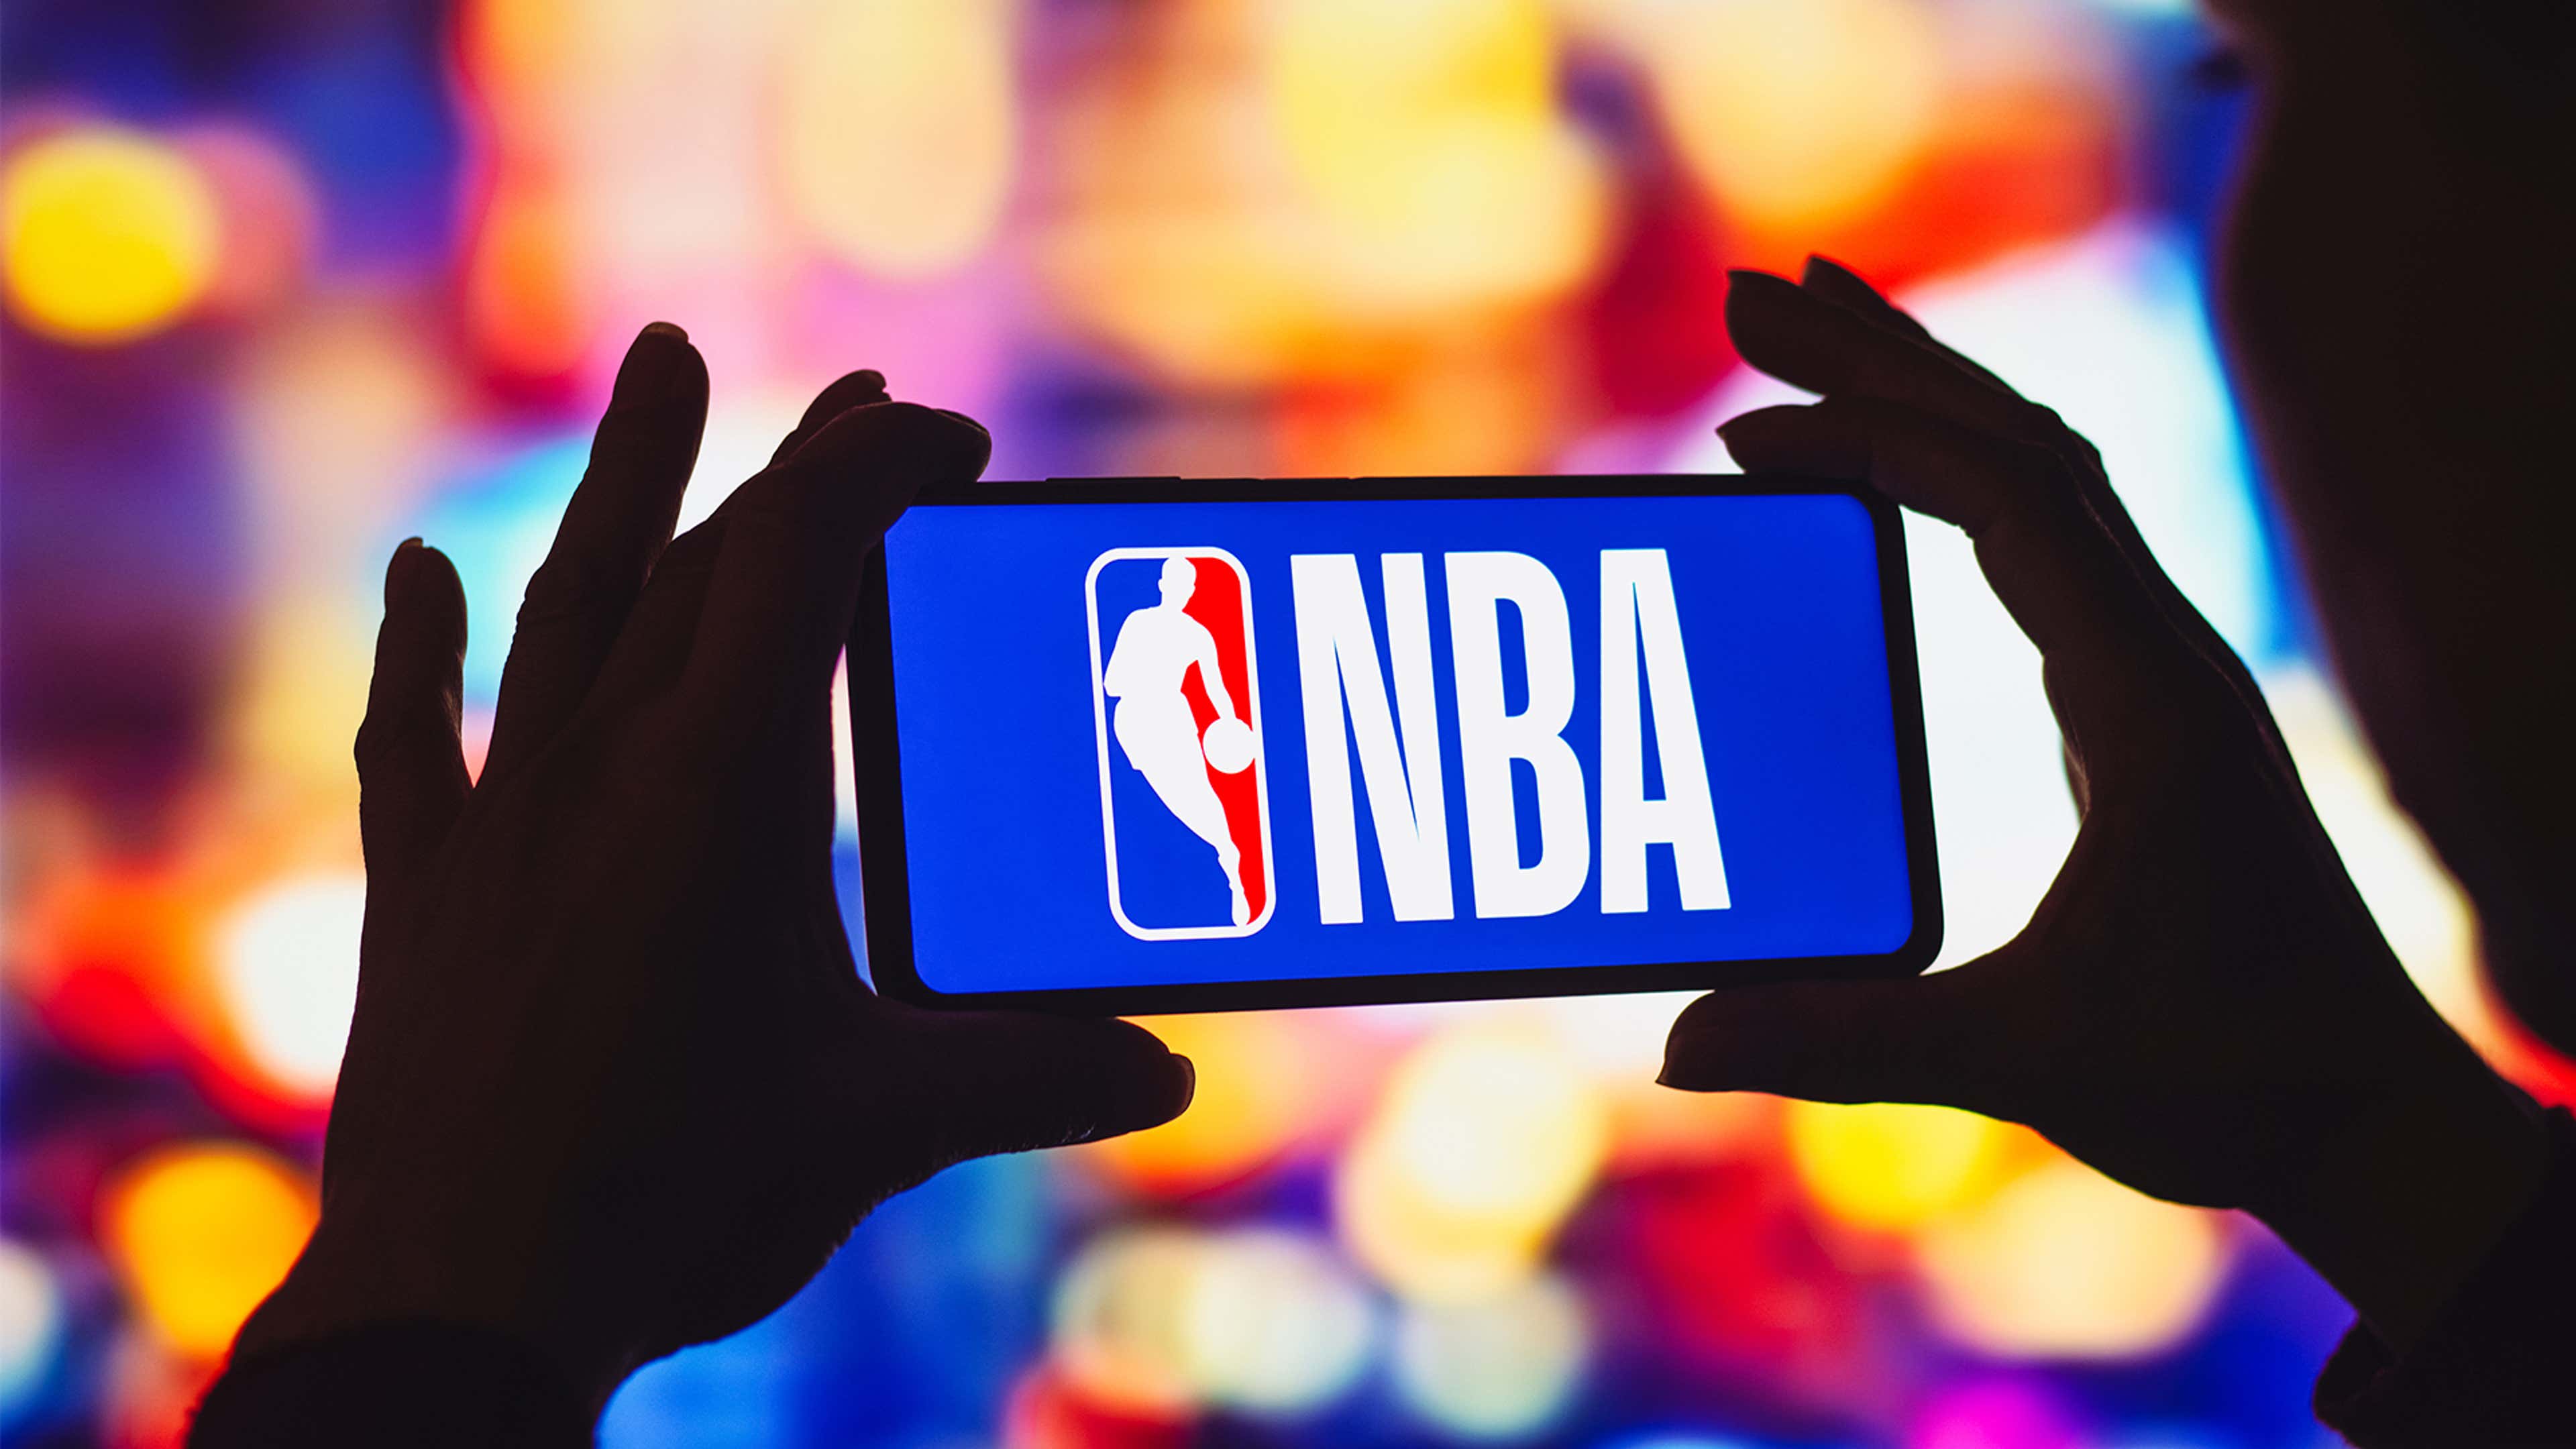 How to Watch Every NBA Basketball Game on a Streaming Service (2023)